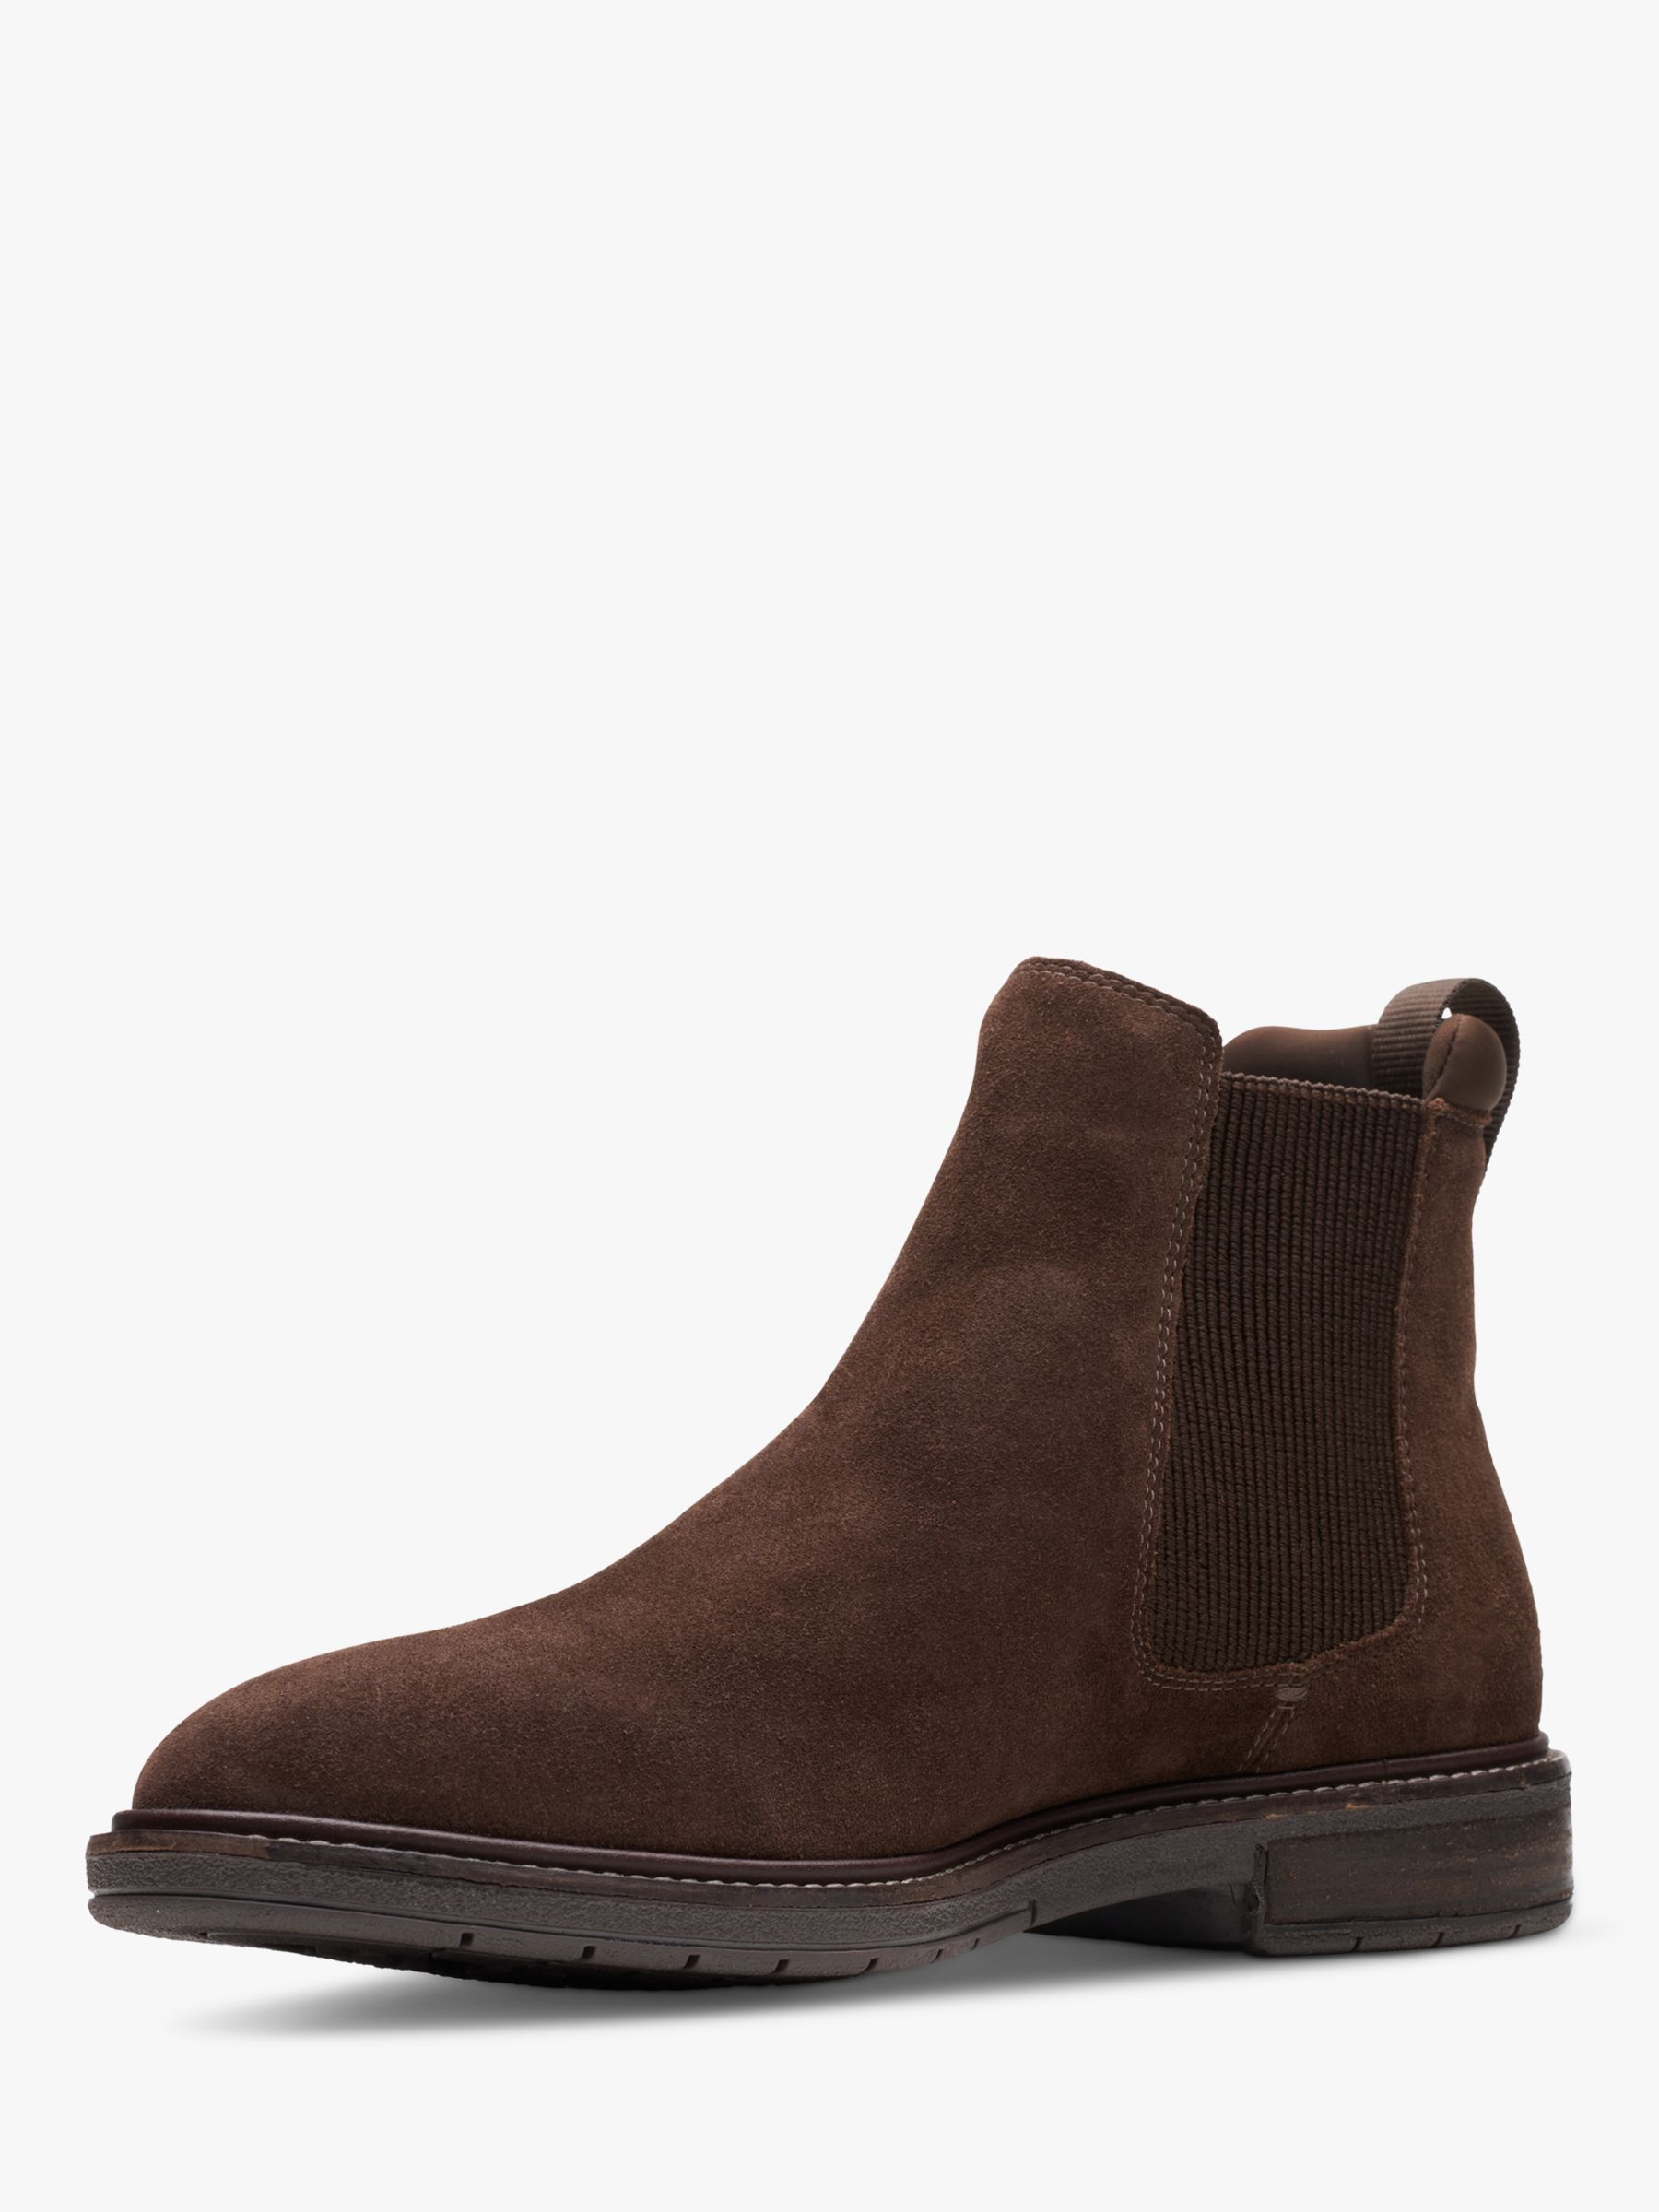 Clarks Clarkdale Hall Suede Chelsea Boots, Dark Brown at John Lewis ...